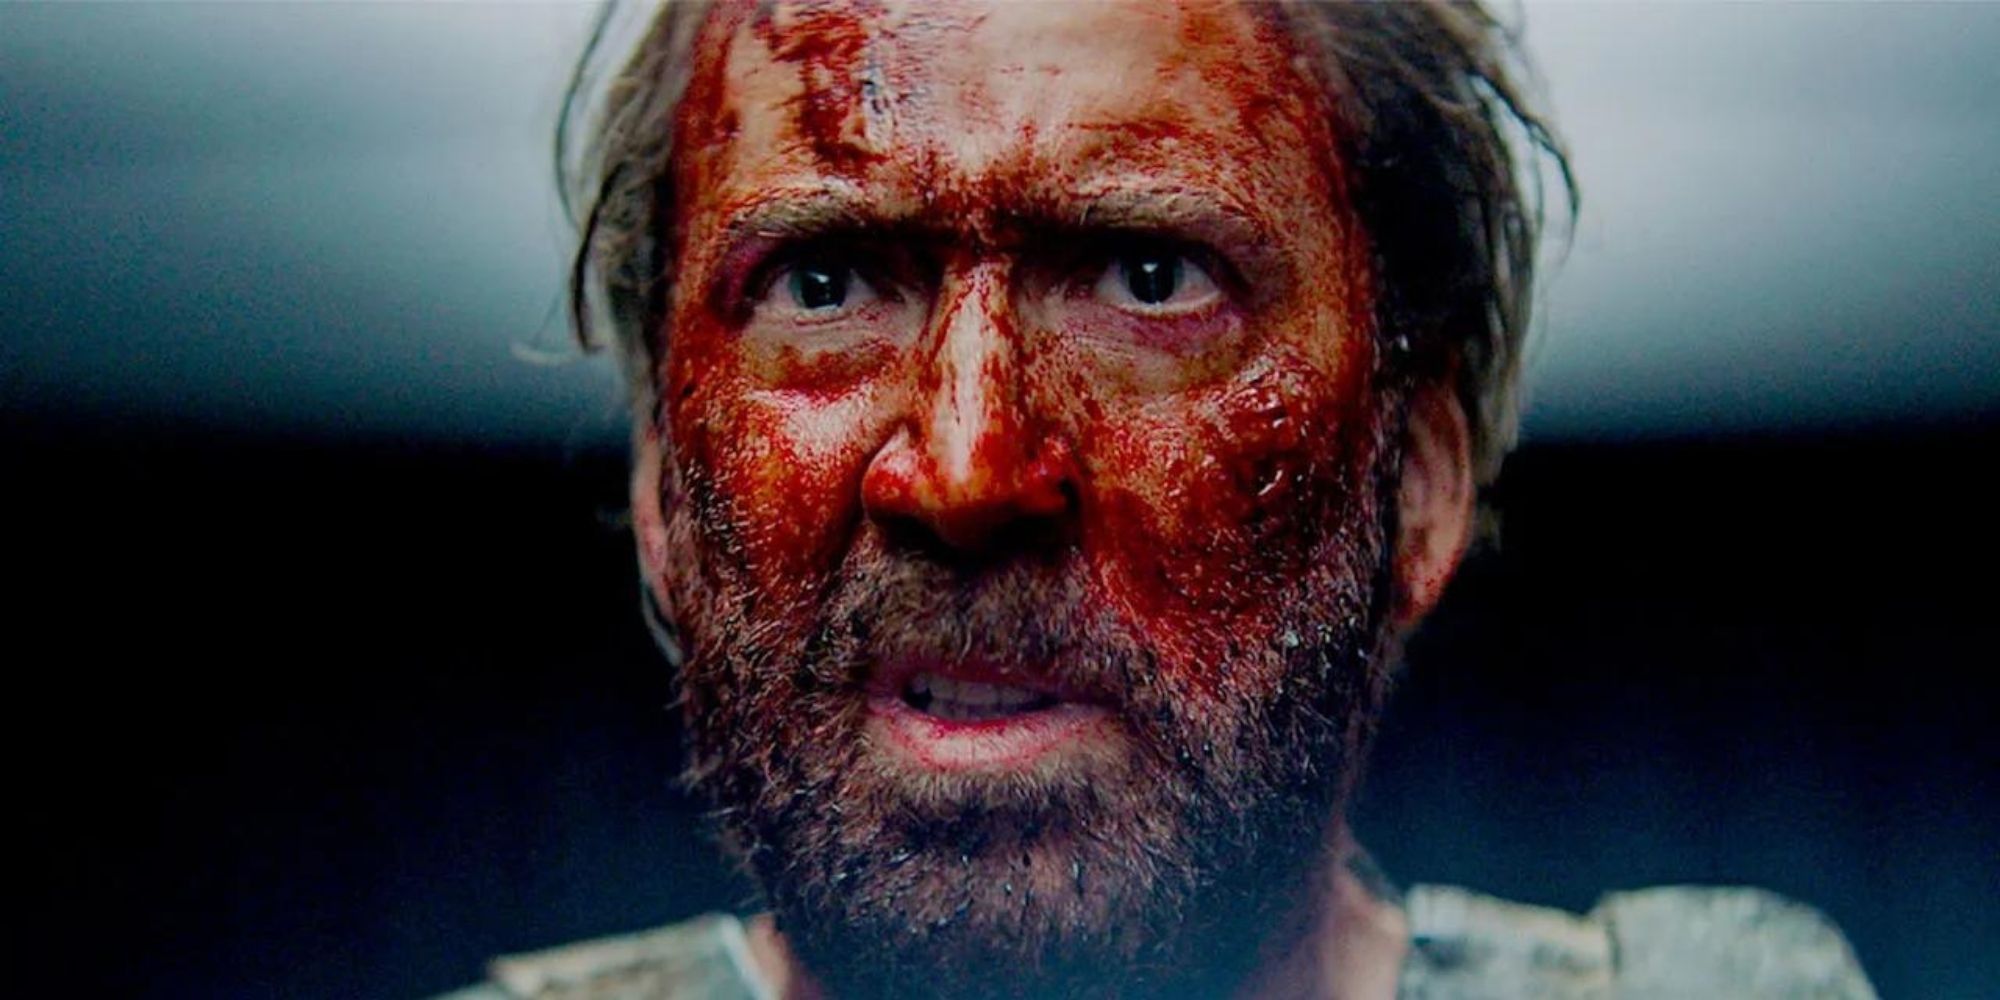 Nicolas Cage in Mandy with blood soaked face and angry